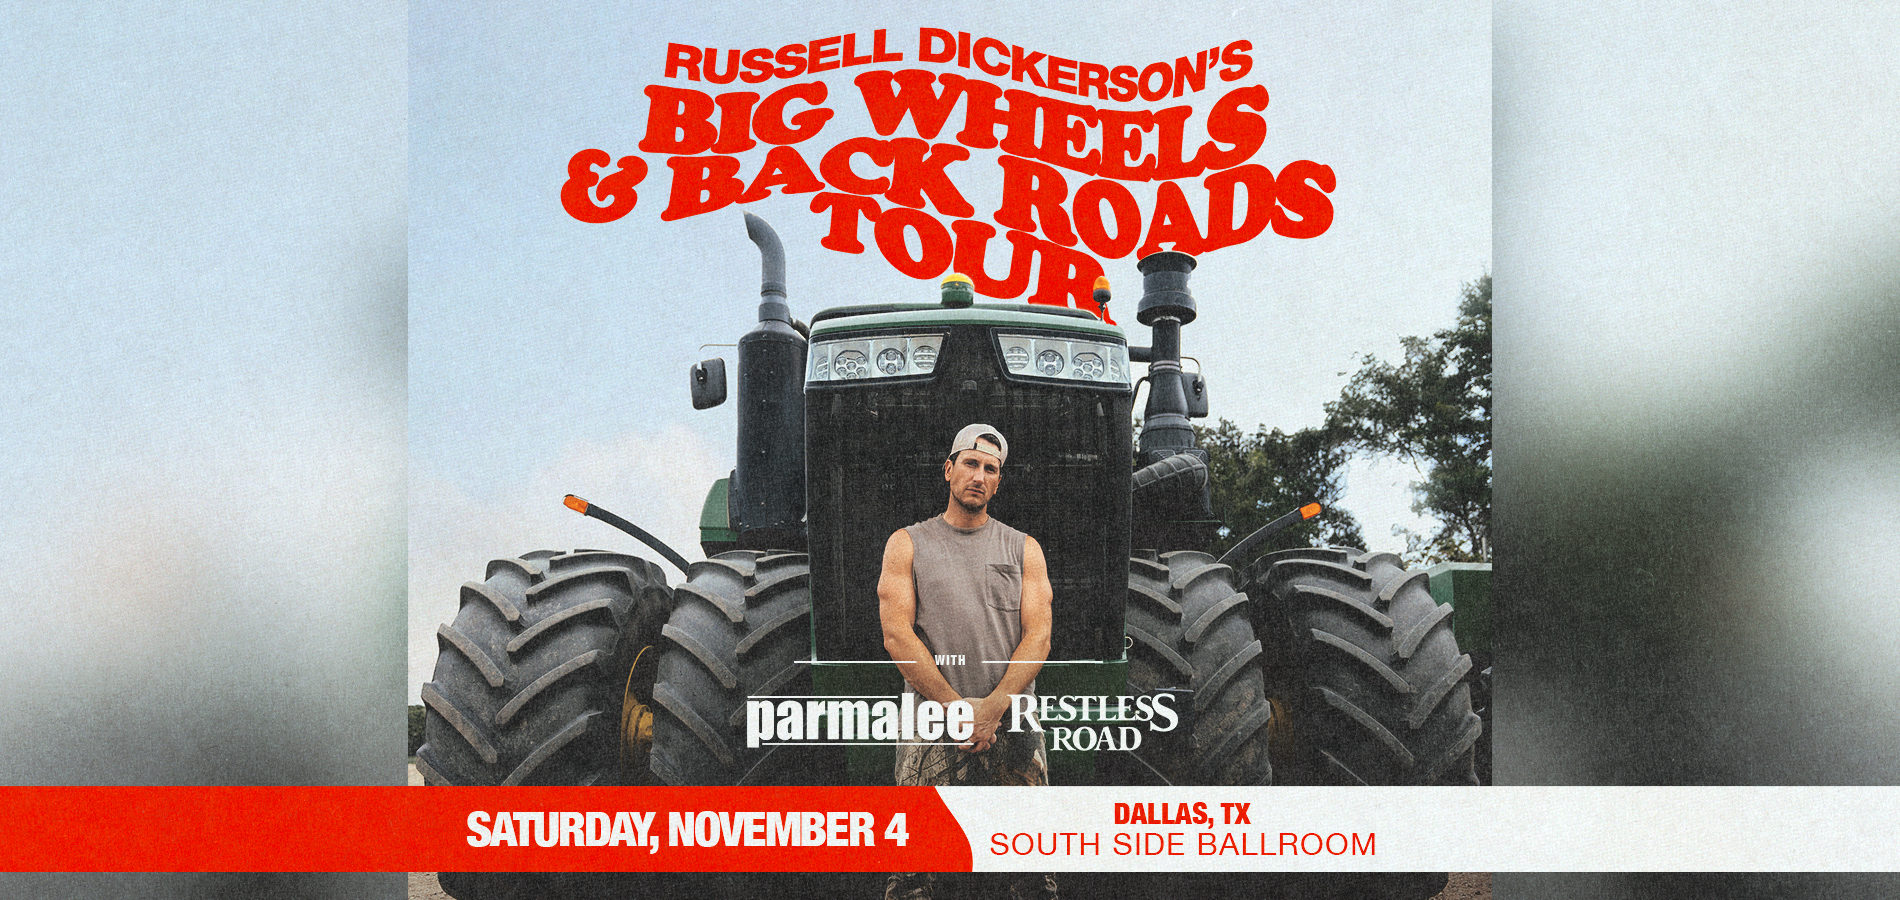 Russell Dickerson’s Big Wheels & Back Roads Tour